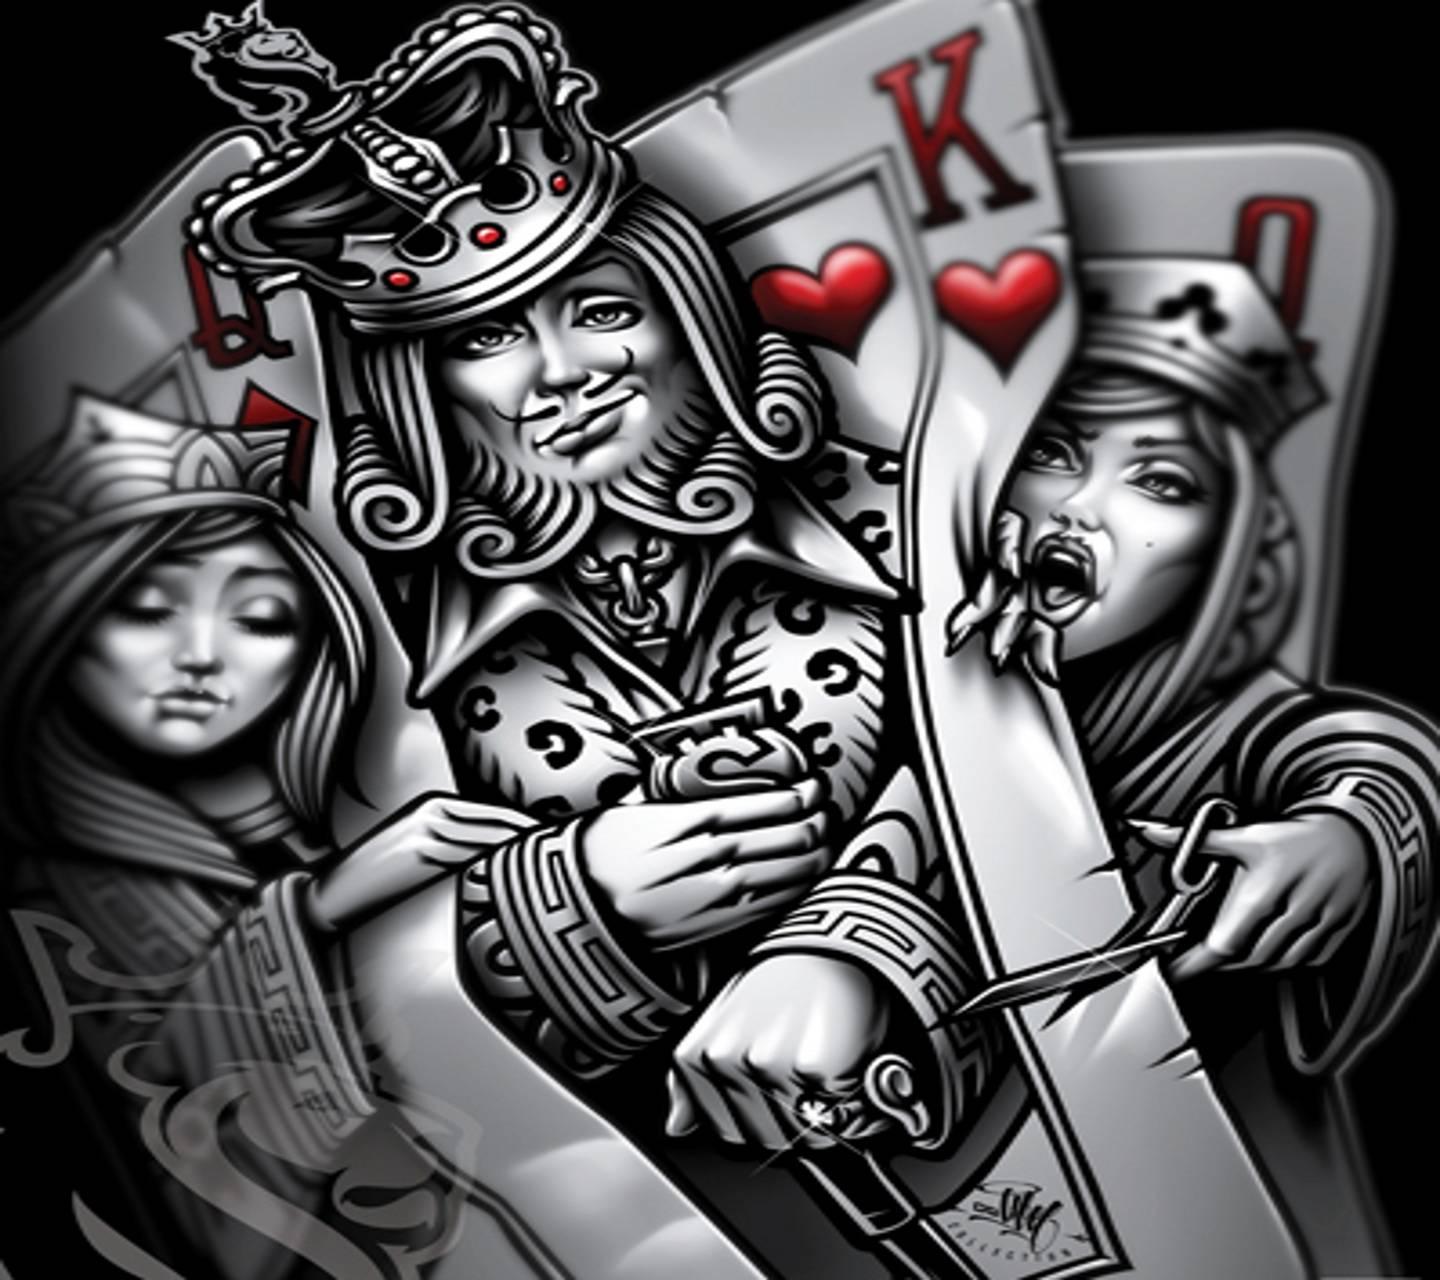 1440 x 1280 · jpeg - KiNG 0F HEARTS wallpaper by M0ST_HATED210 - 6c - Free on ZEDGETM